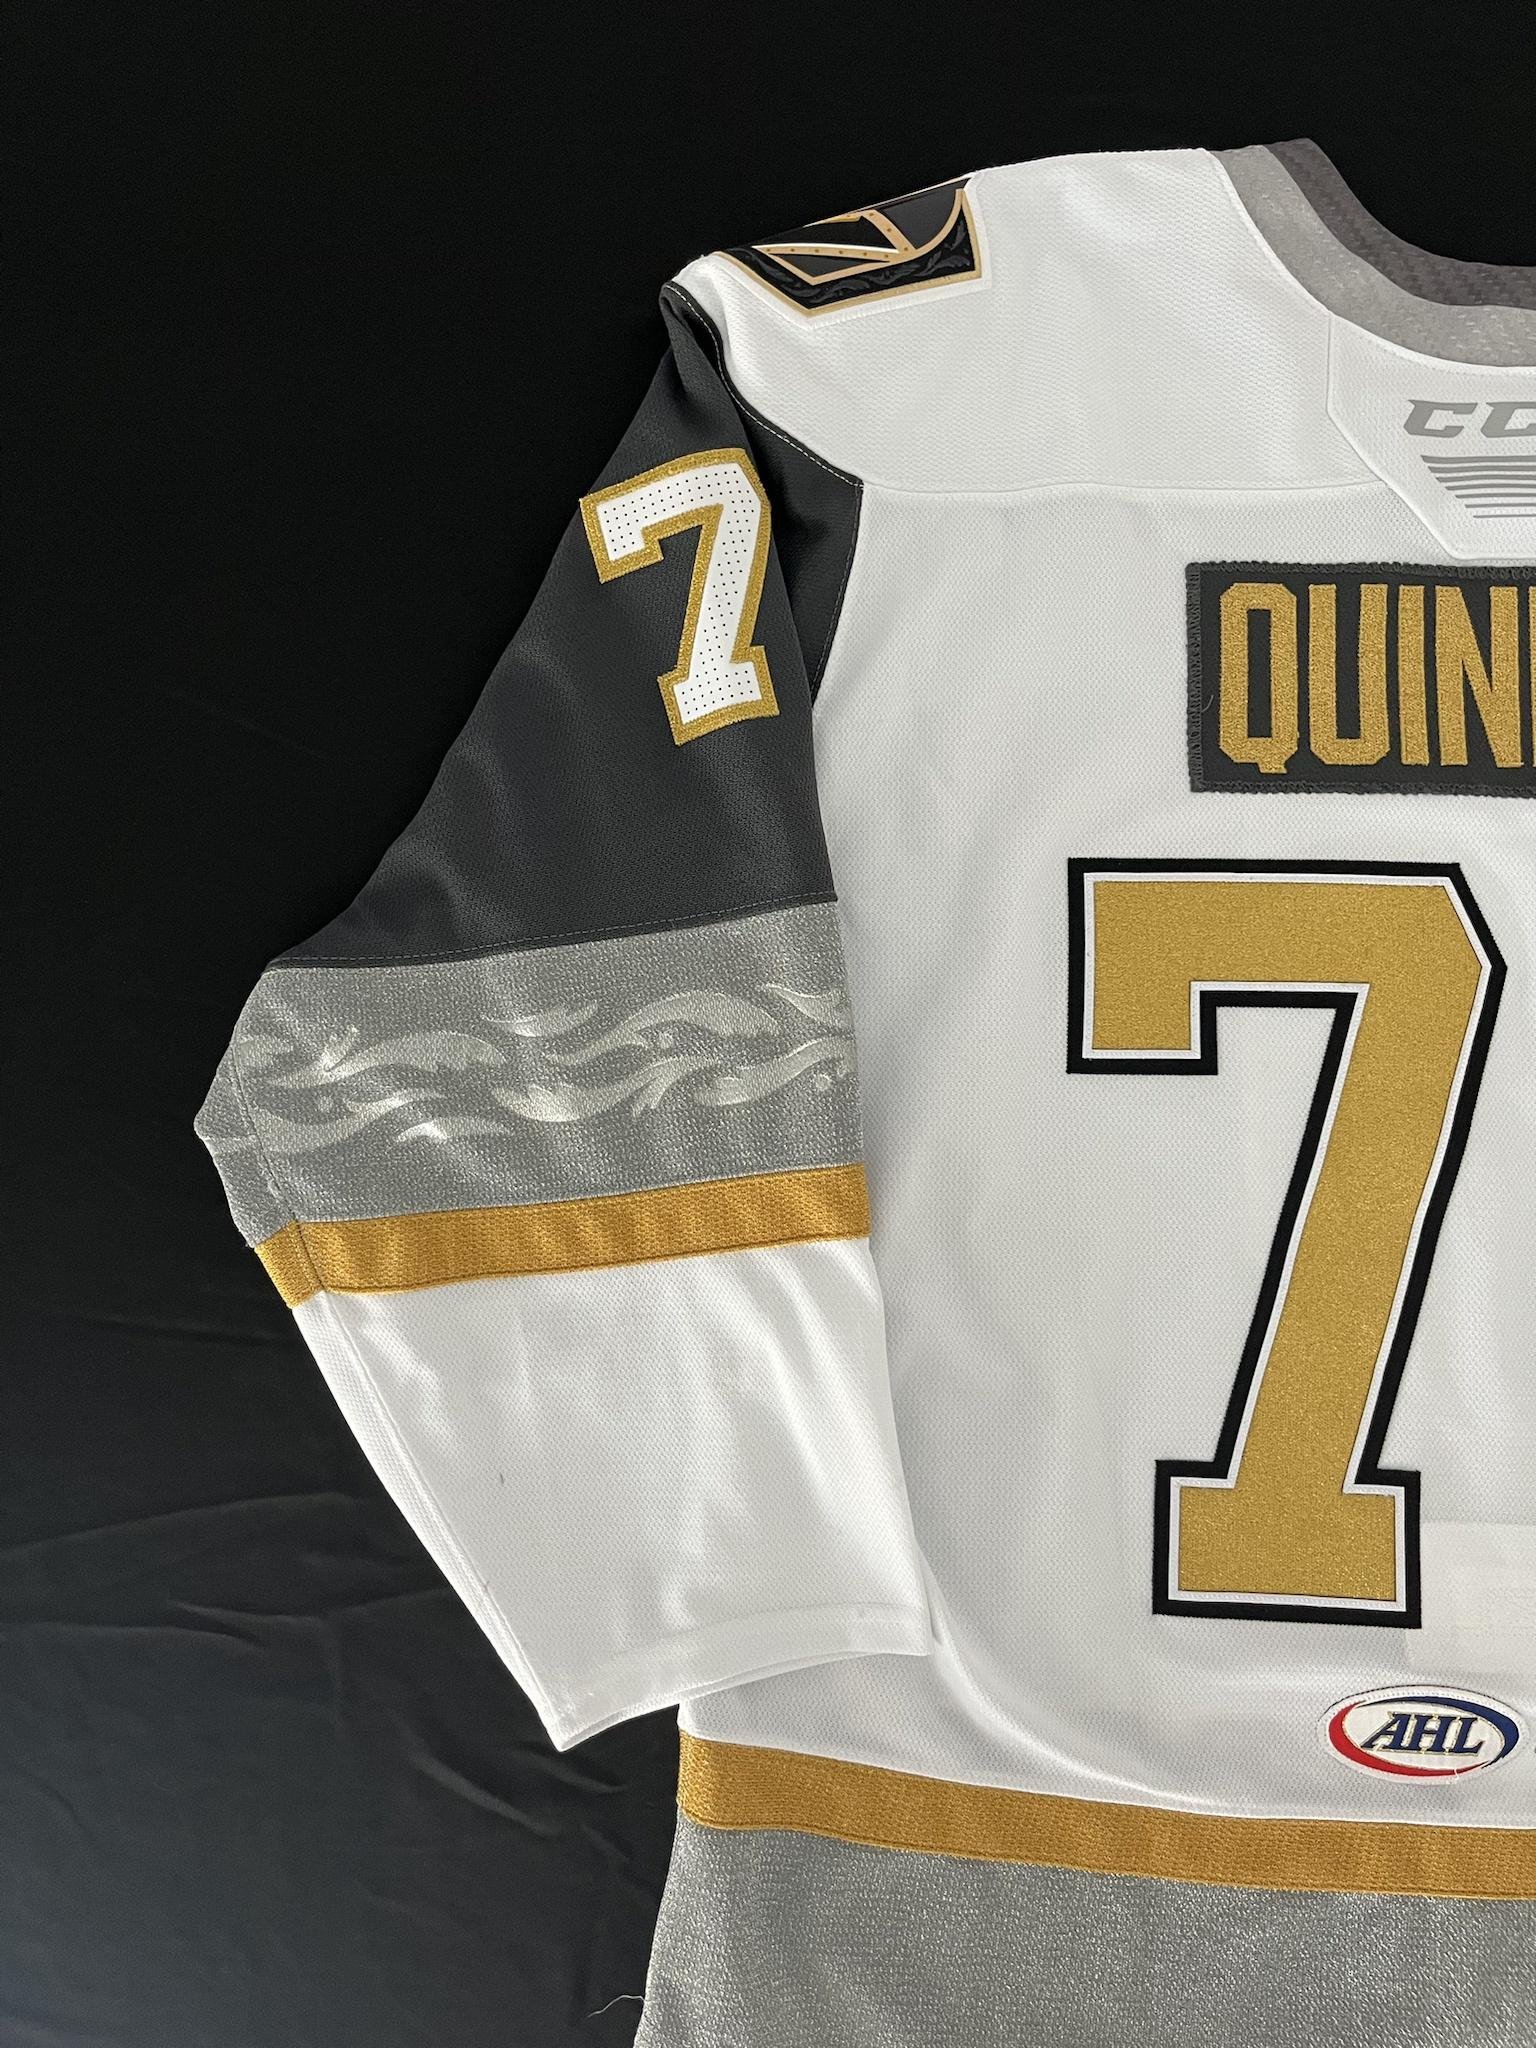 I think it's really cool': AHL's Henderson Silver Knights unveil uniforms -  The Athletic